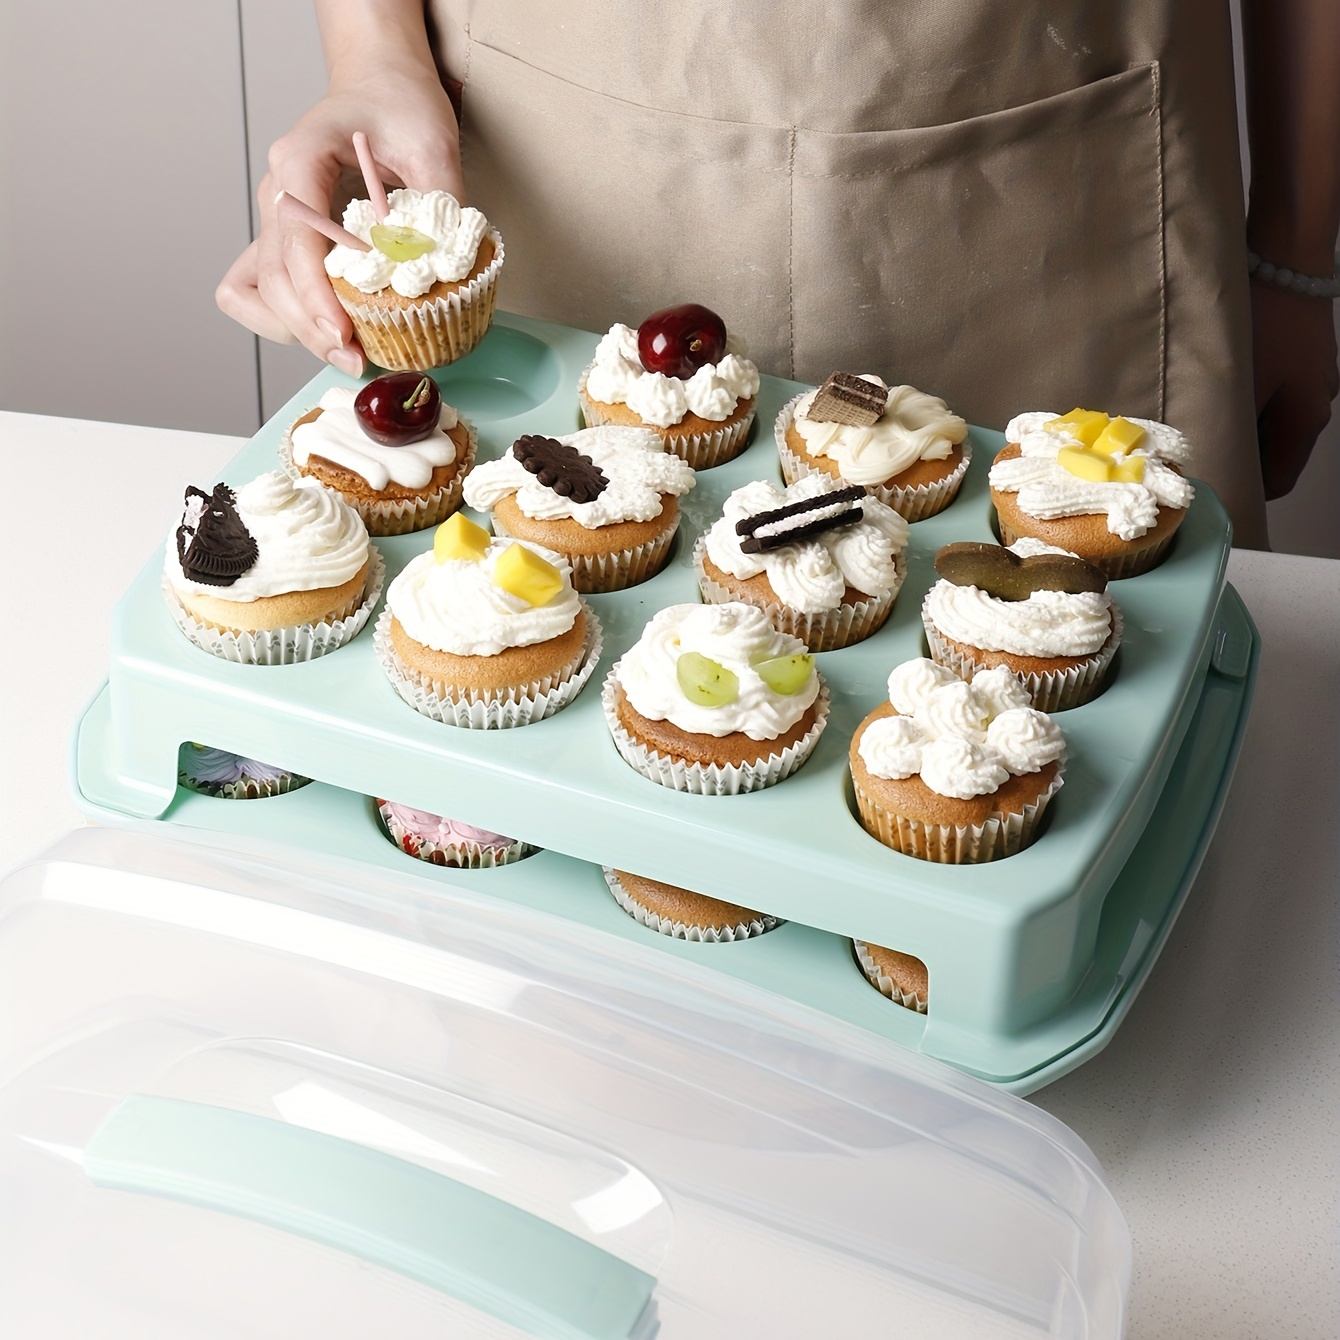 1pc Box Portable Cake Box Portable Dessert Cake Carrier with Lid and Handle  Cupcake Containers Cake Carrier Holder Cupcake Carrier Pastry Carrier Dome